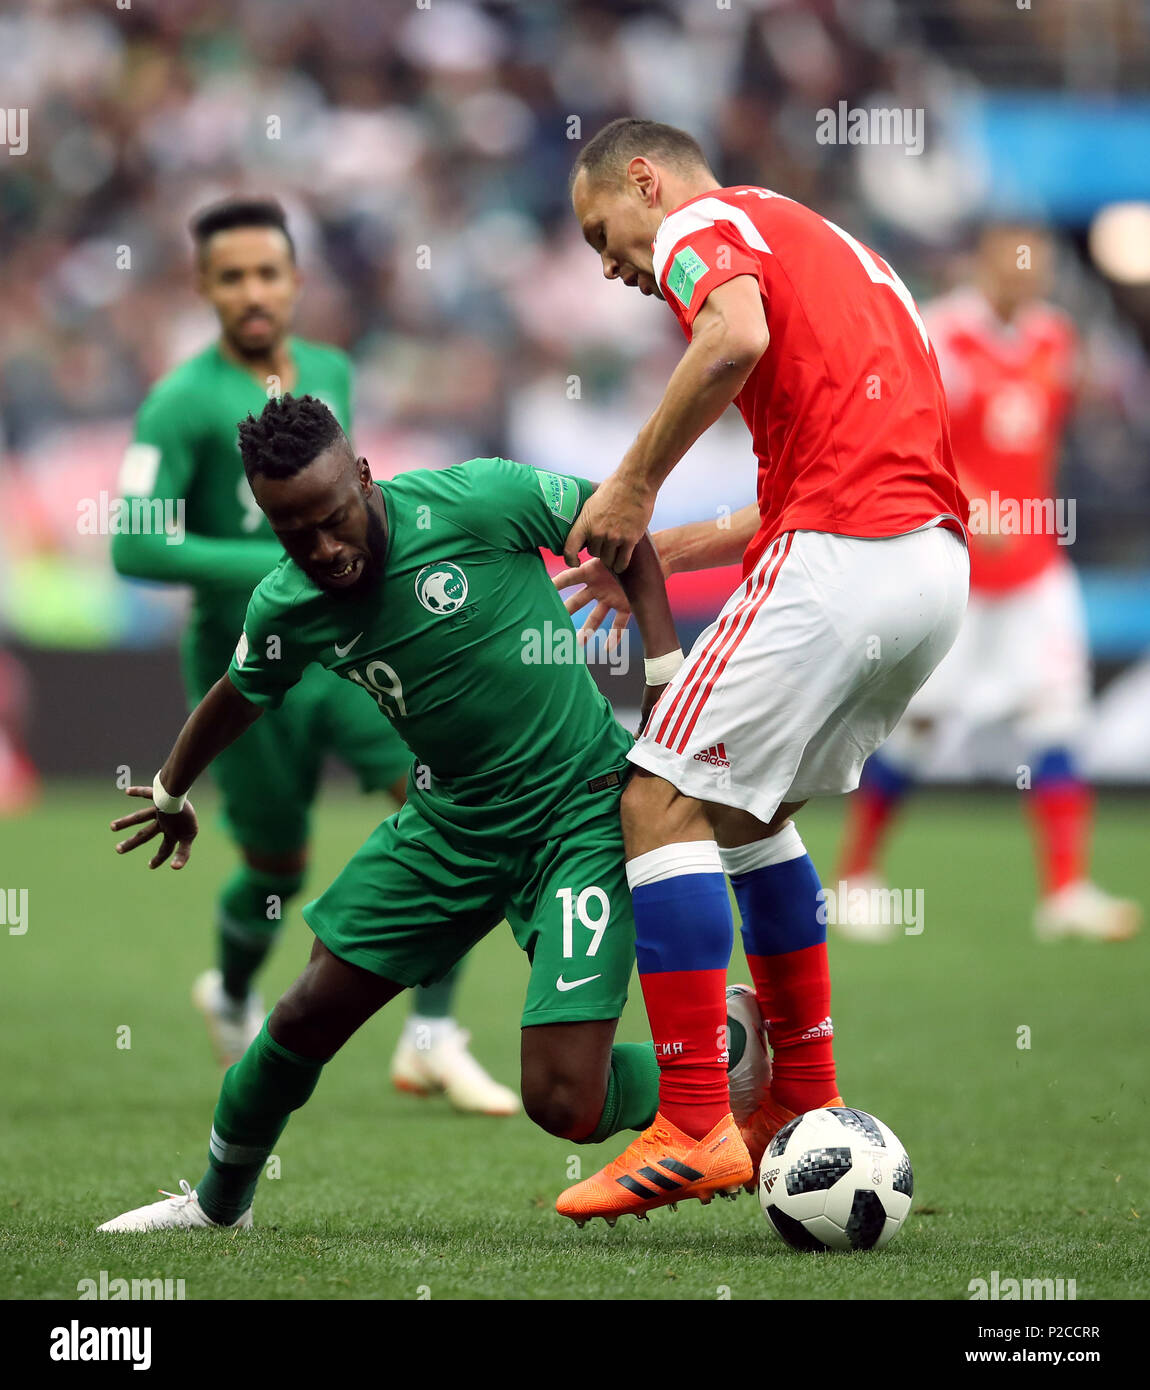 Saudi Arabia's Fahad Al-Muwallad (left) and Russia's Sergei Ignashevich battle for the ball during the FIFA World Cup 2018, Group A match at the Luzhniki Stadium, Moscow. Stock Photo